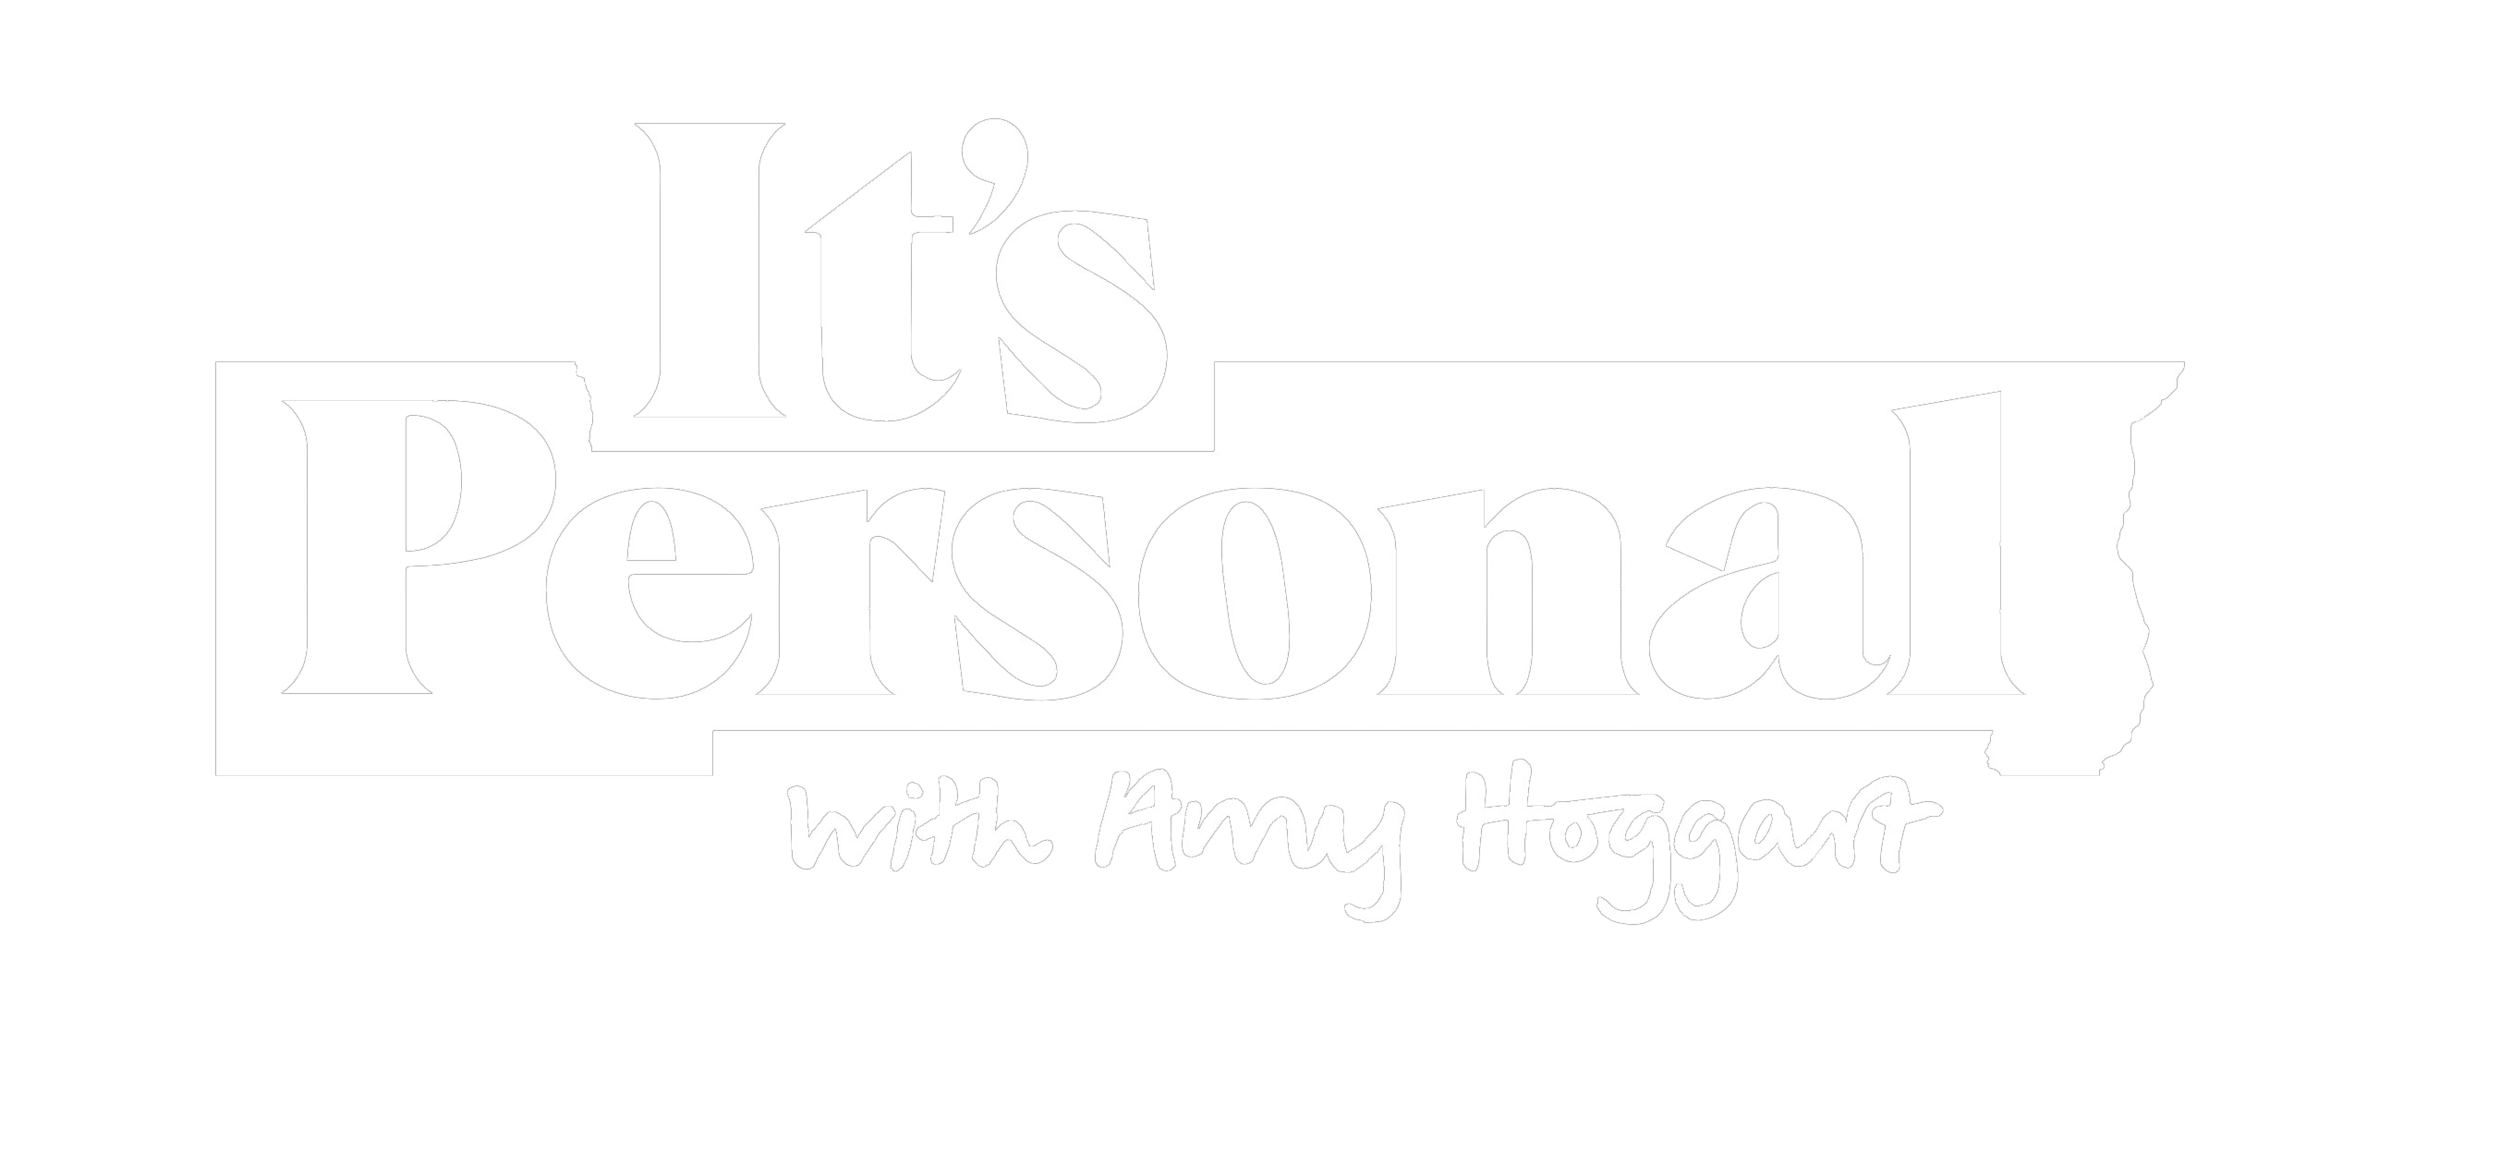 Its_Personal_BW_Logo.png